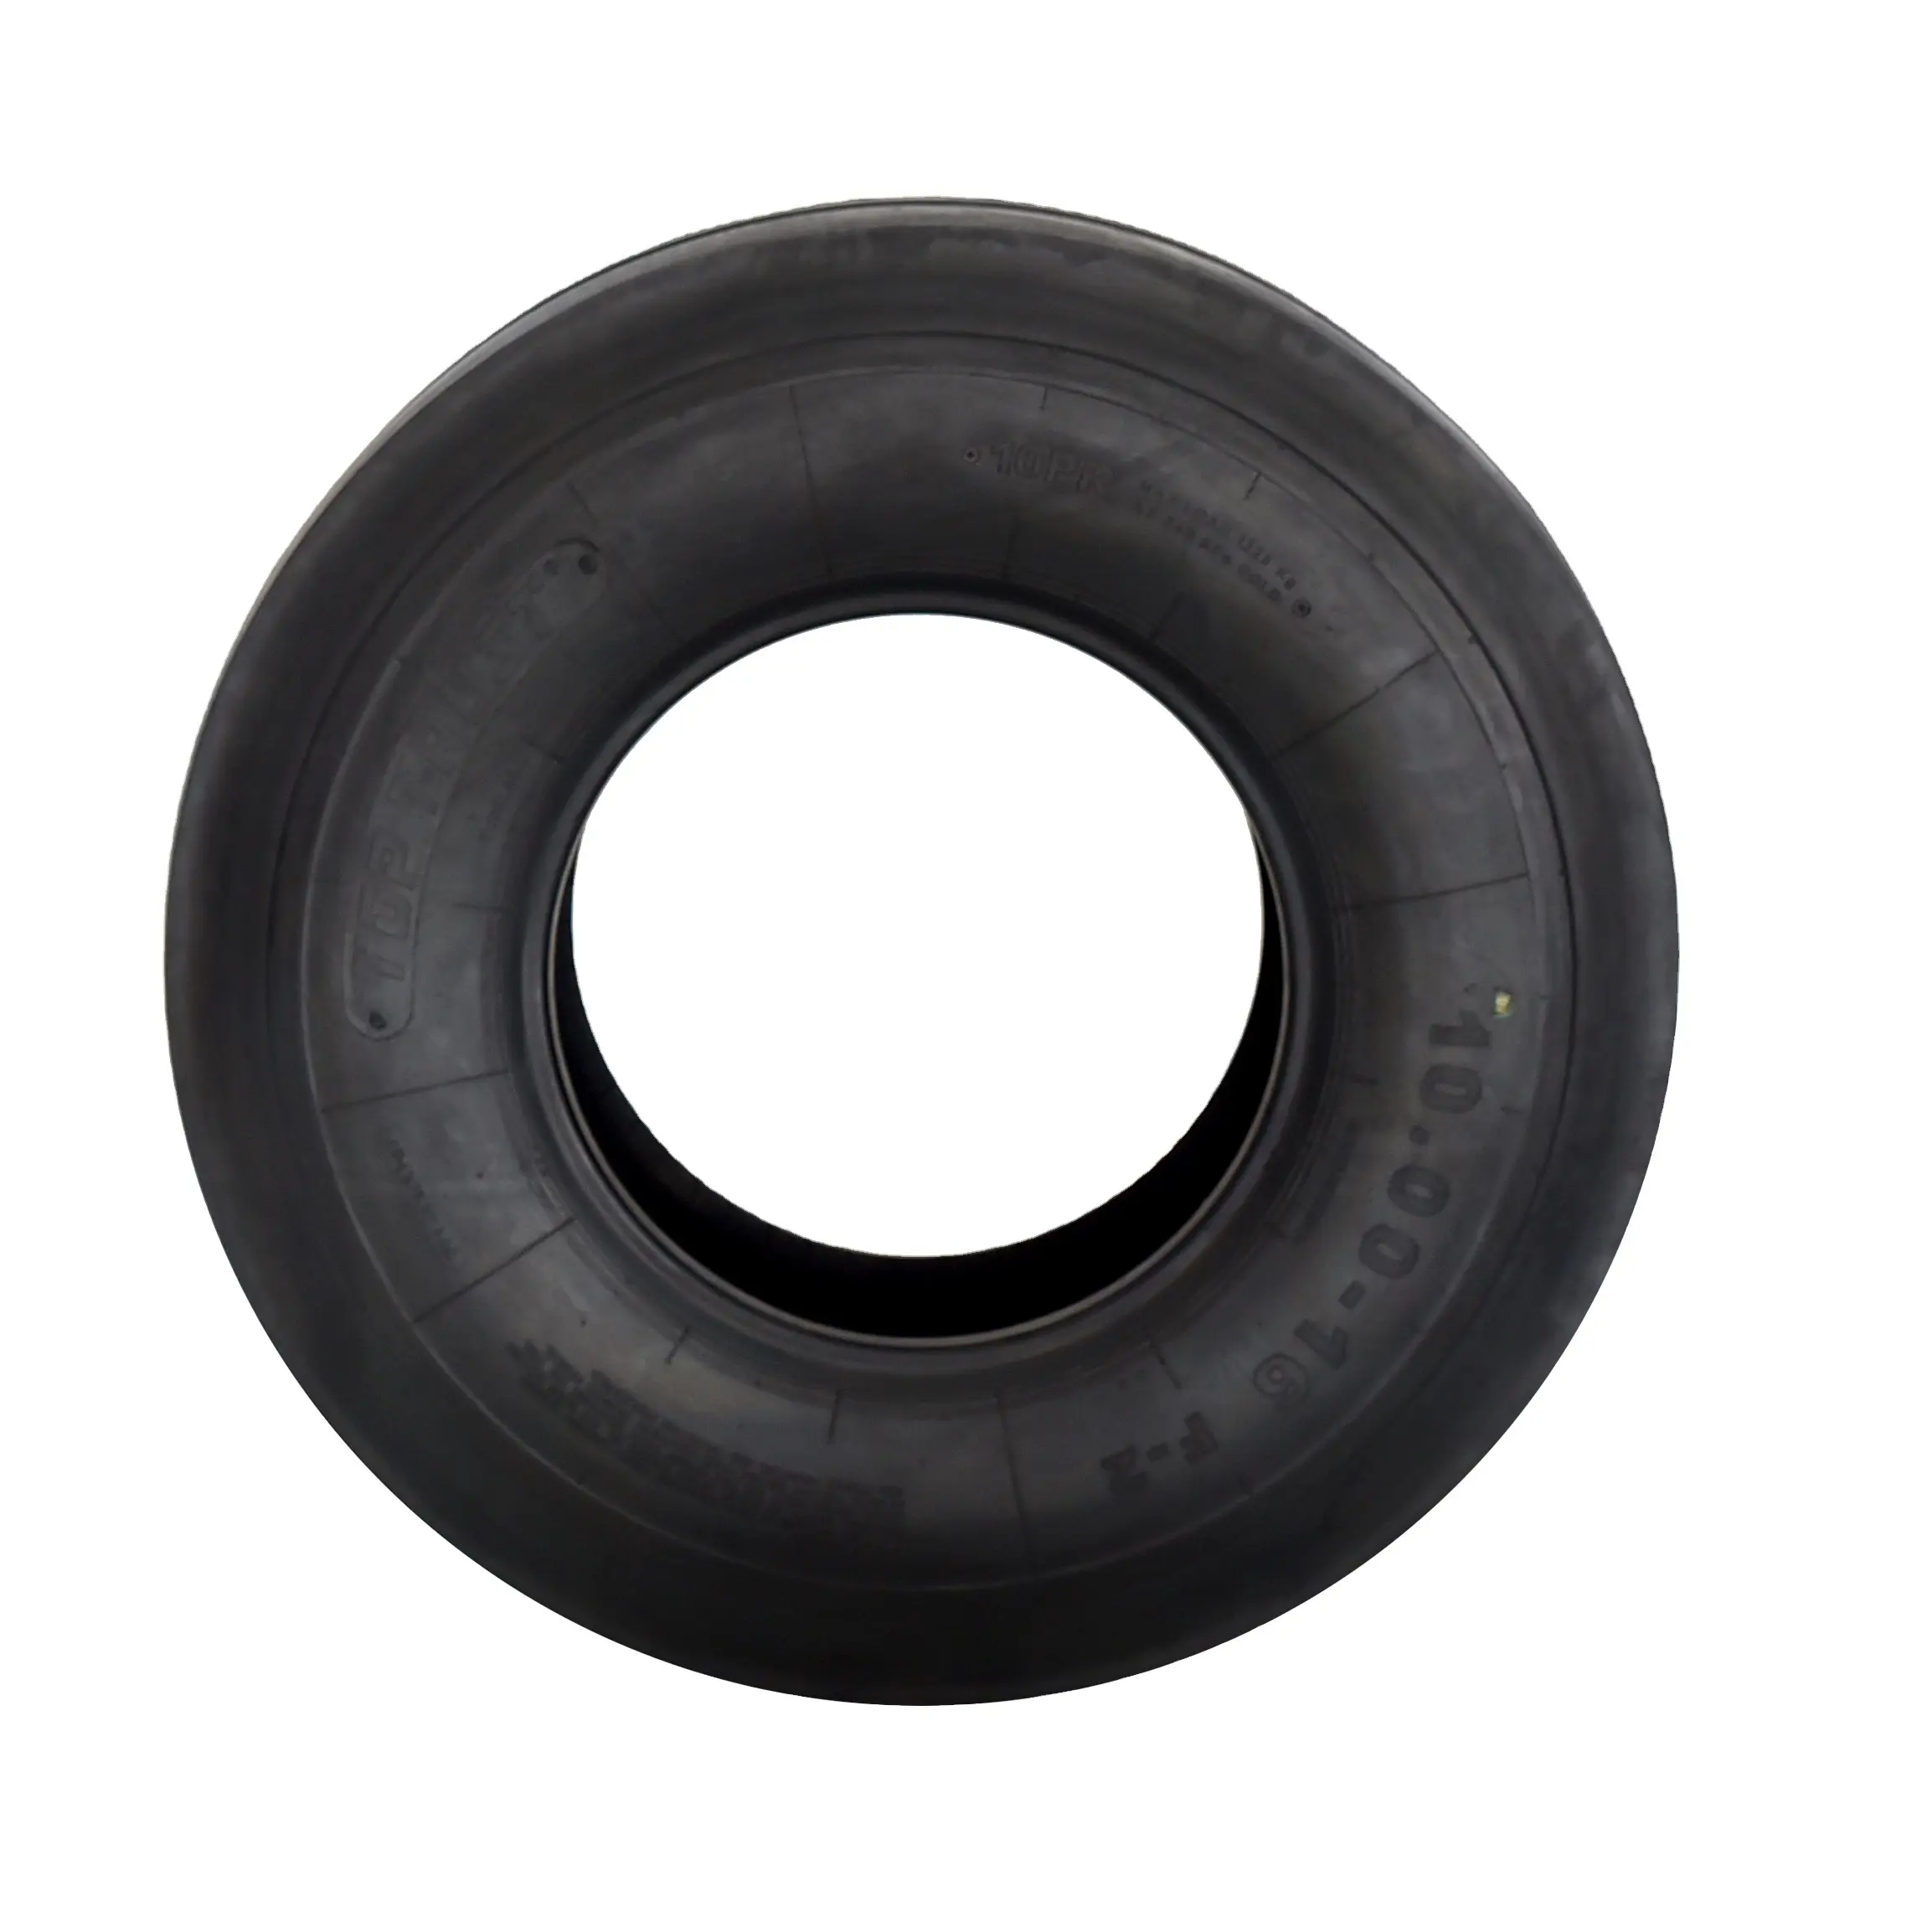 F2-2 10.00-16 11.00-16 Tire, Agriculture Tyres for Tractor, Made in China Factory of All Win and Top Trust Brand.